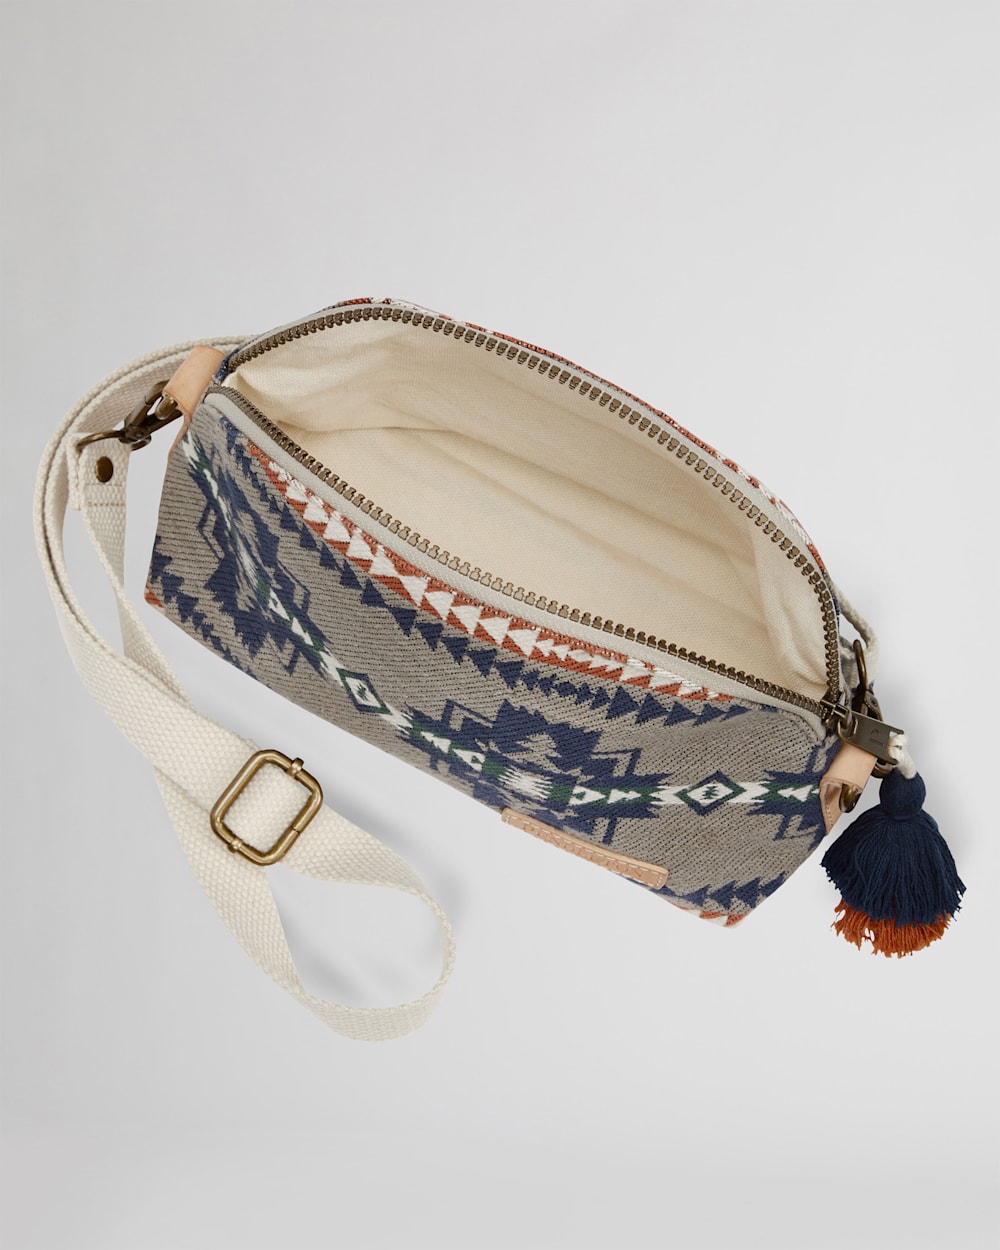 ALTERNATE VIEW OF COTTON JACQUARD DOME CROSSBODY IN TAUPE CHIEF JOSEPH image number 3